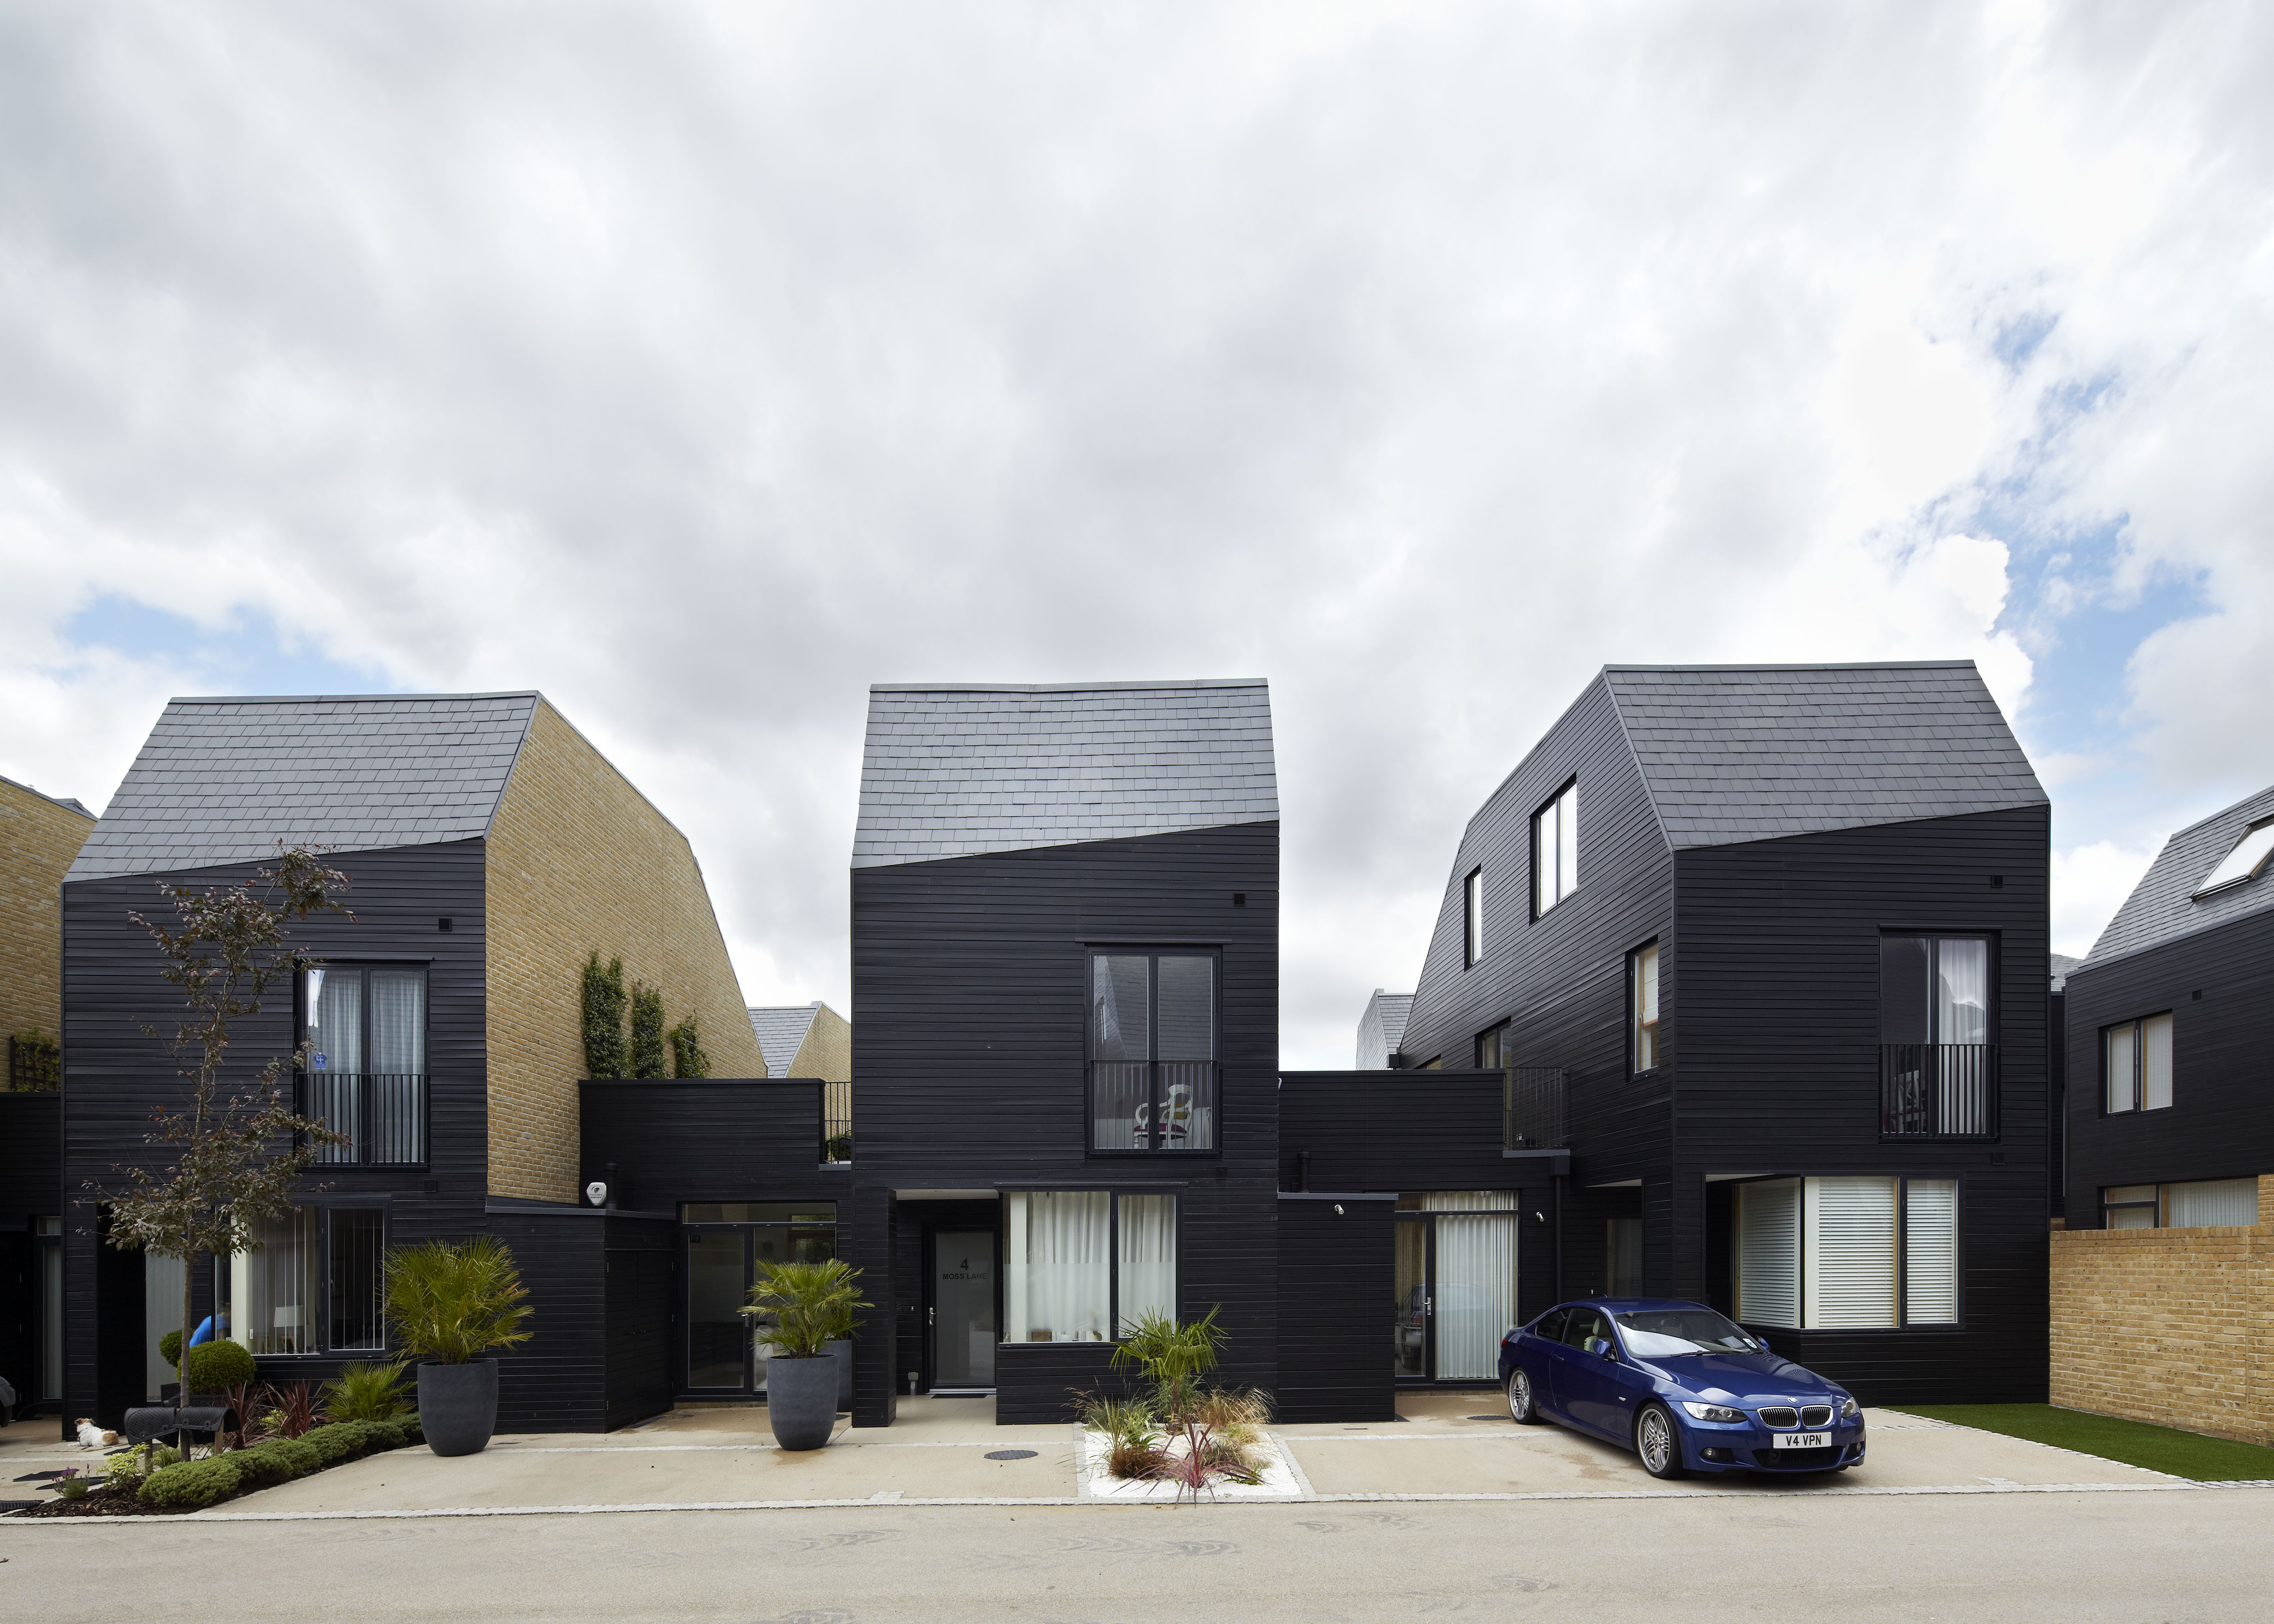 Newhall Be, Harlow / Exemplar Design | Essex Design Guide